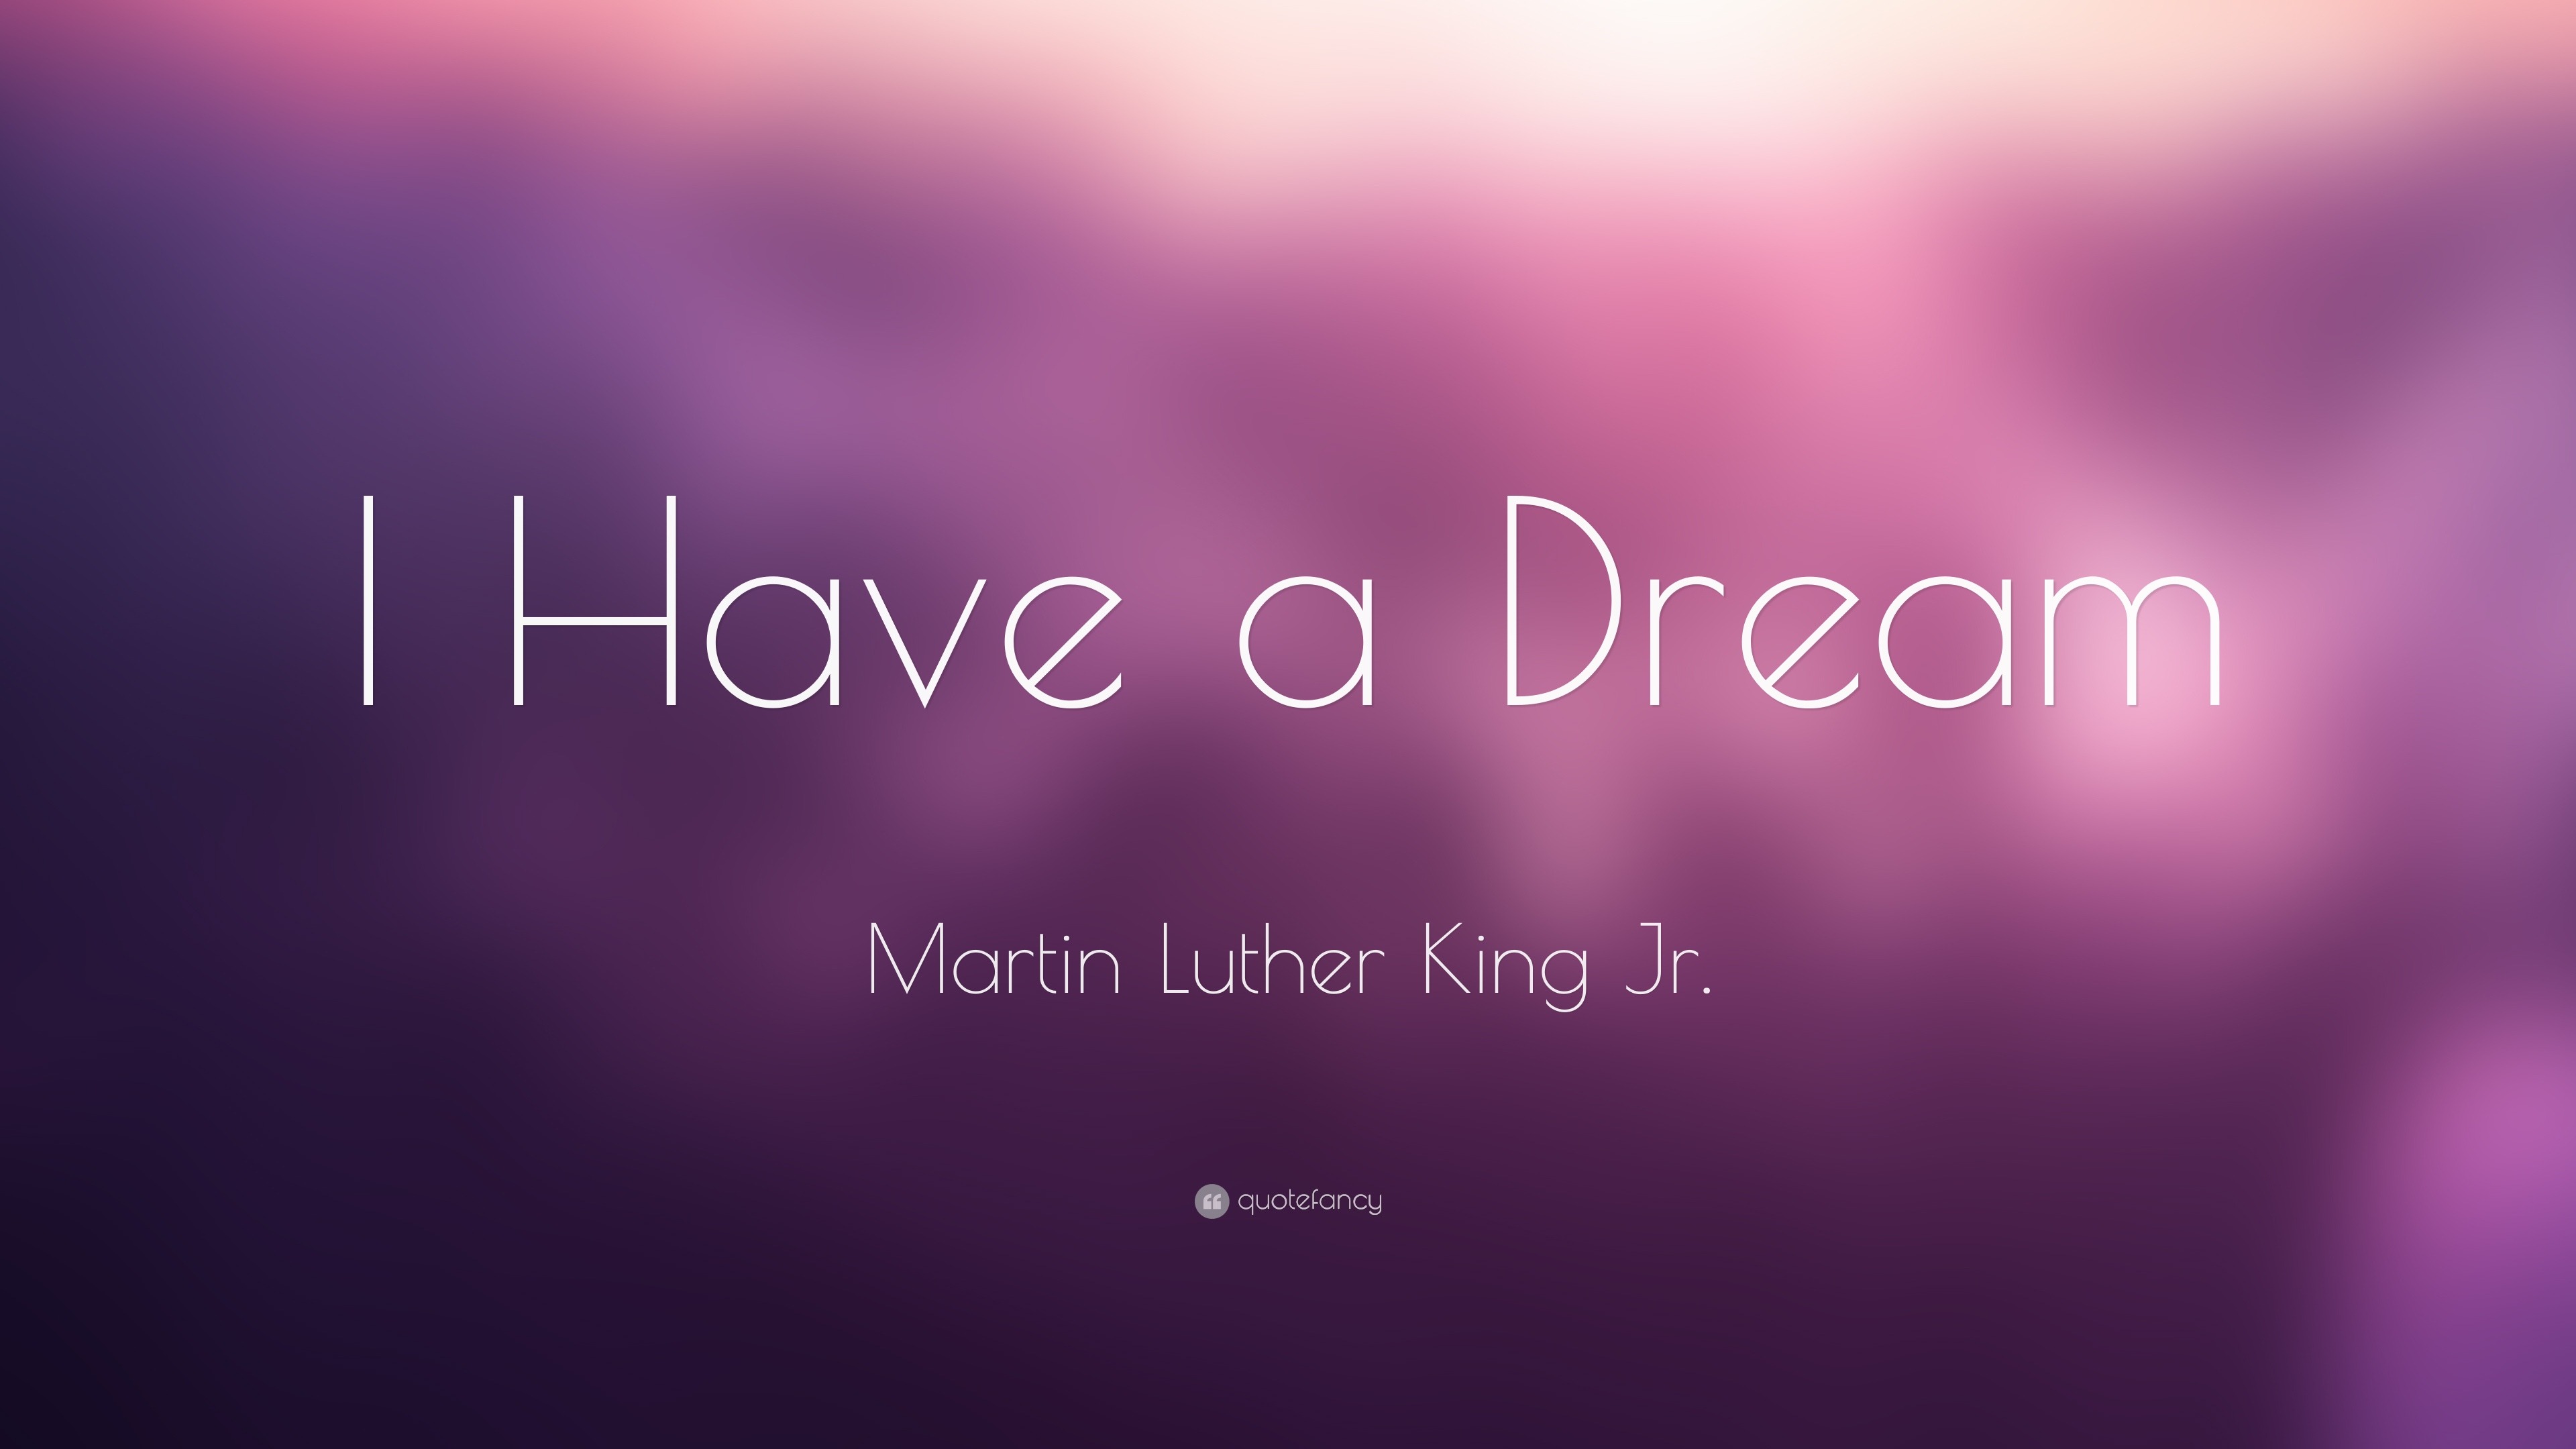 Martin Luther King Jr. Quote “I Have a Dream” (9 wallpapers) Quotefancy